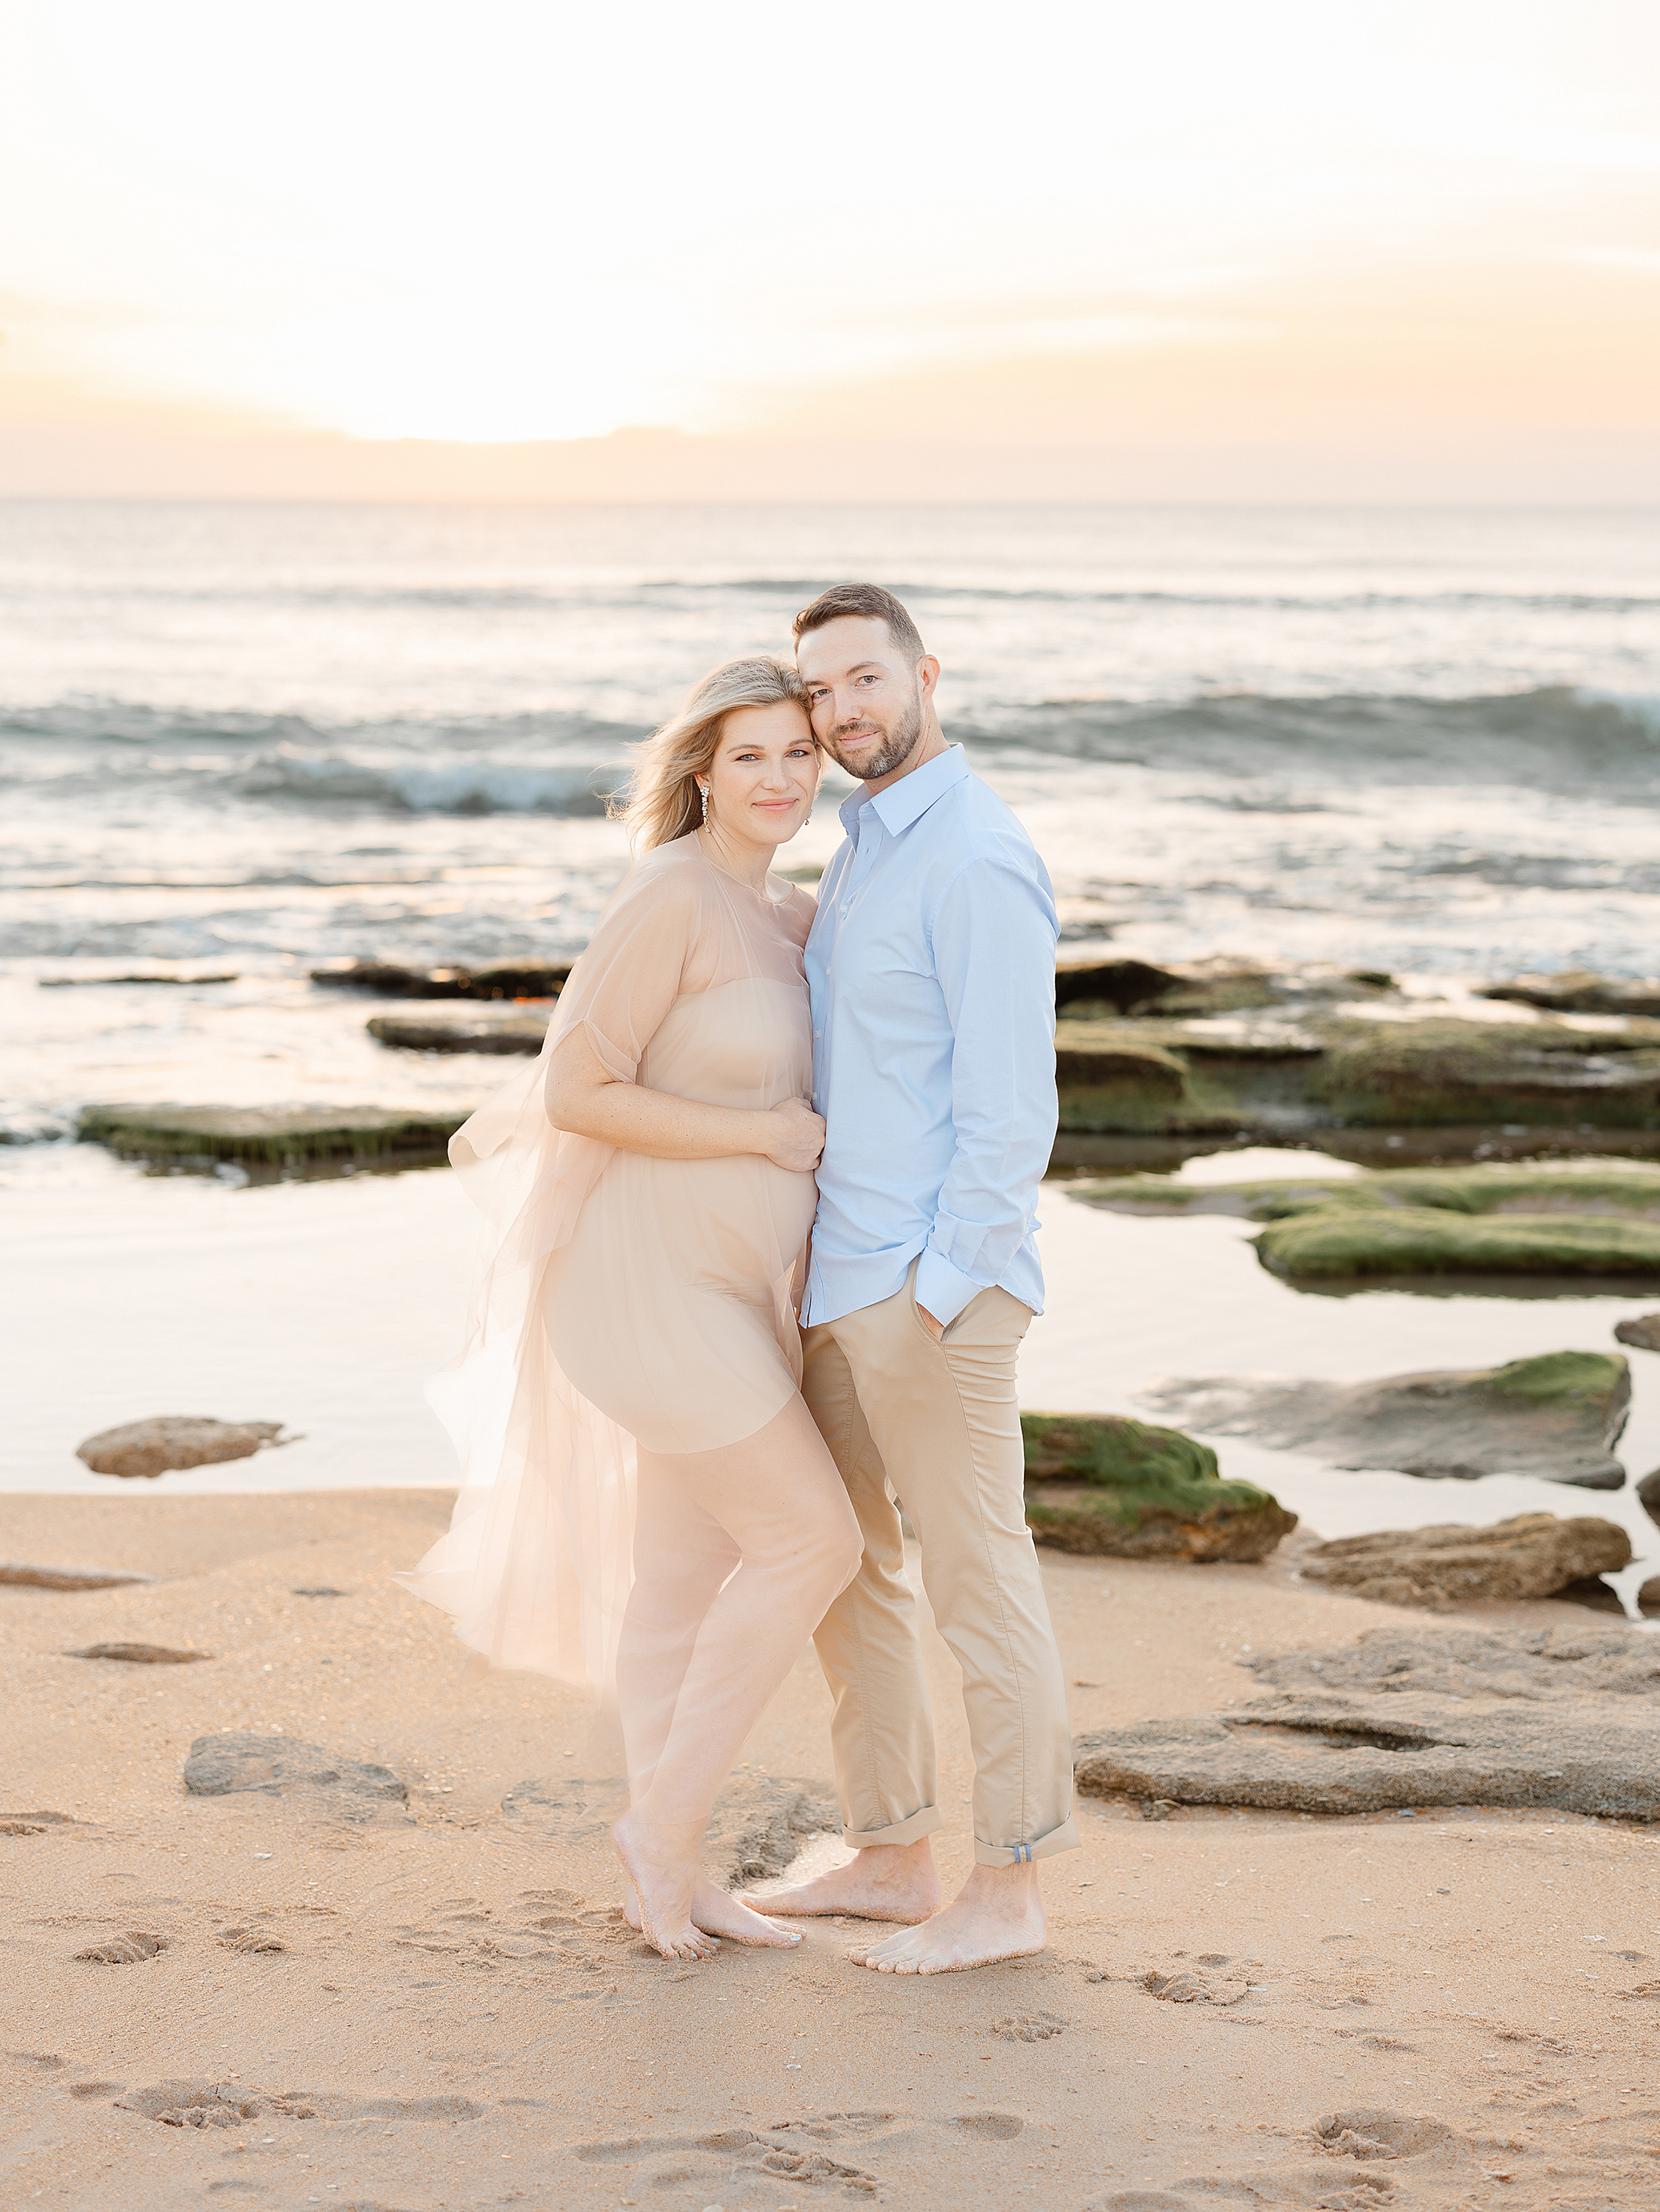 St. Augustine Beach sunrise coastal maternity session with a light and airy theme.